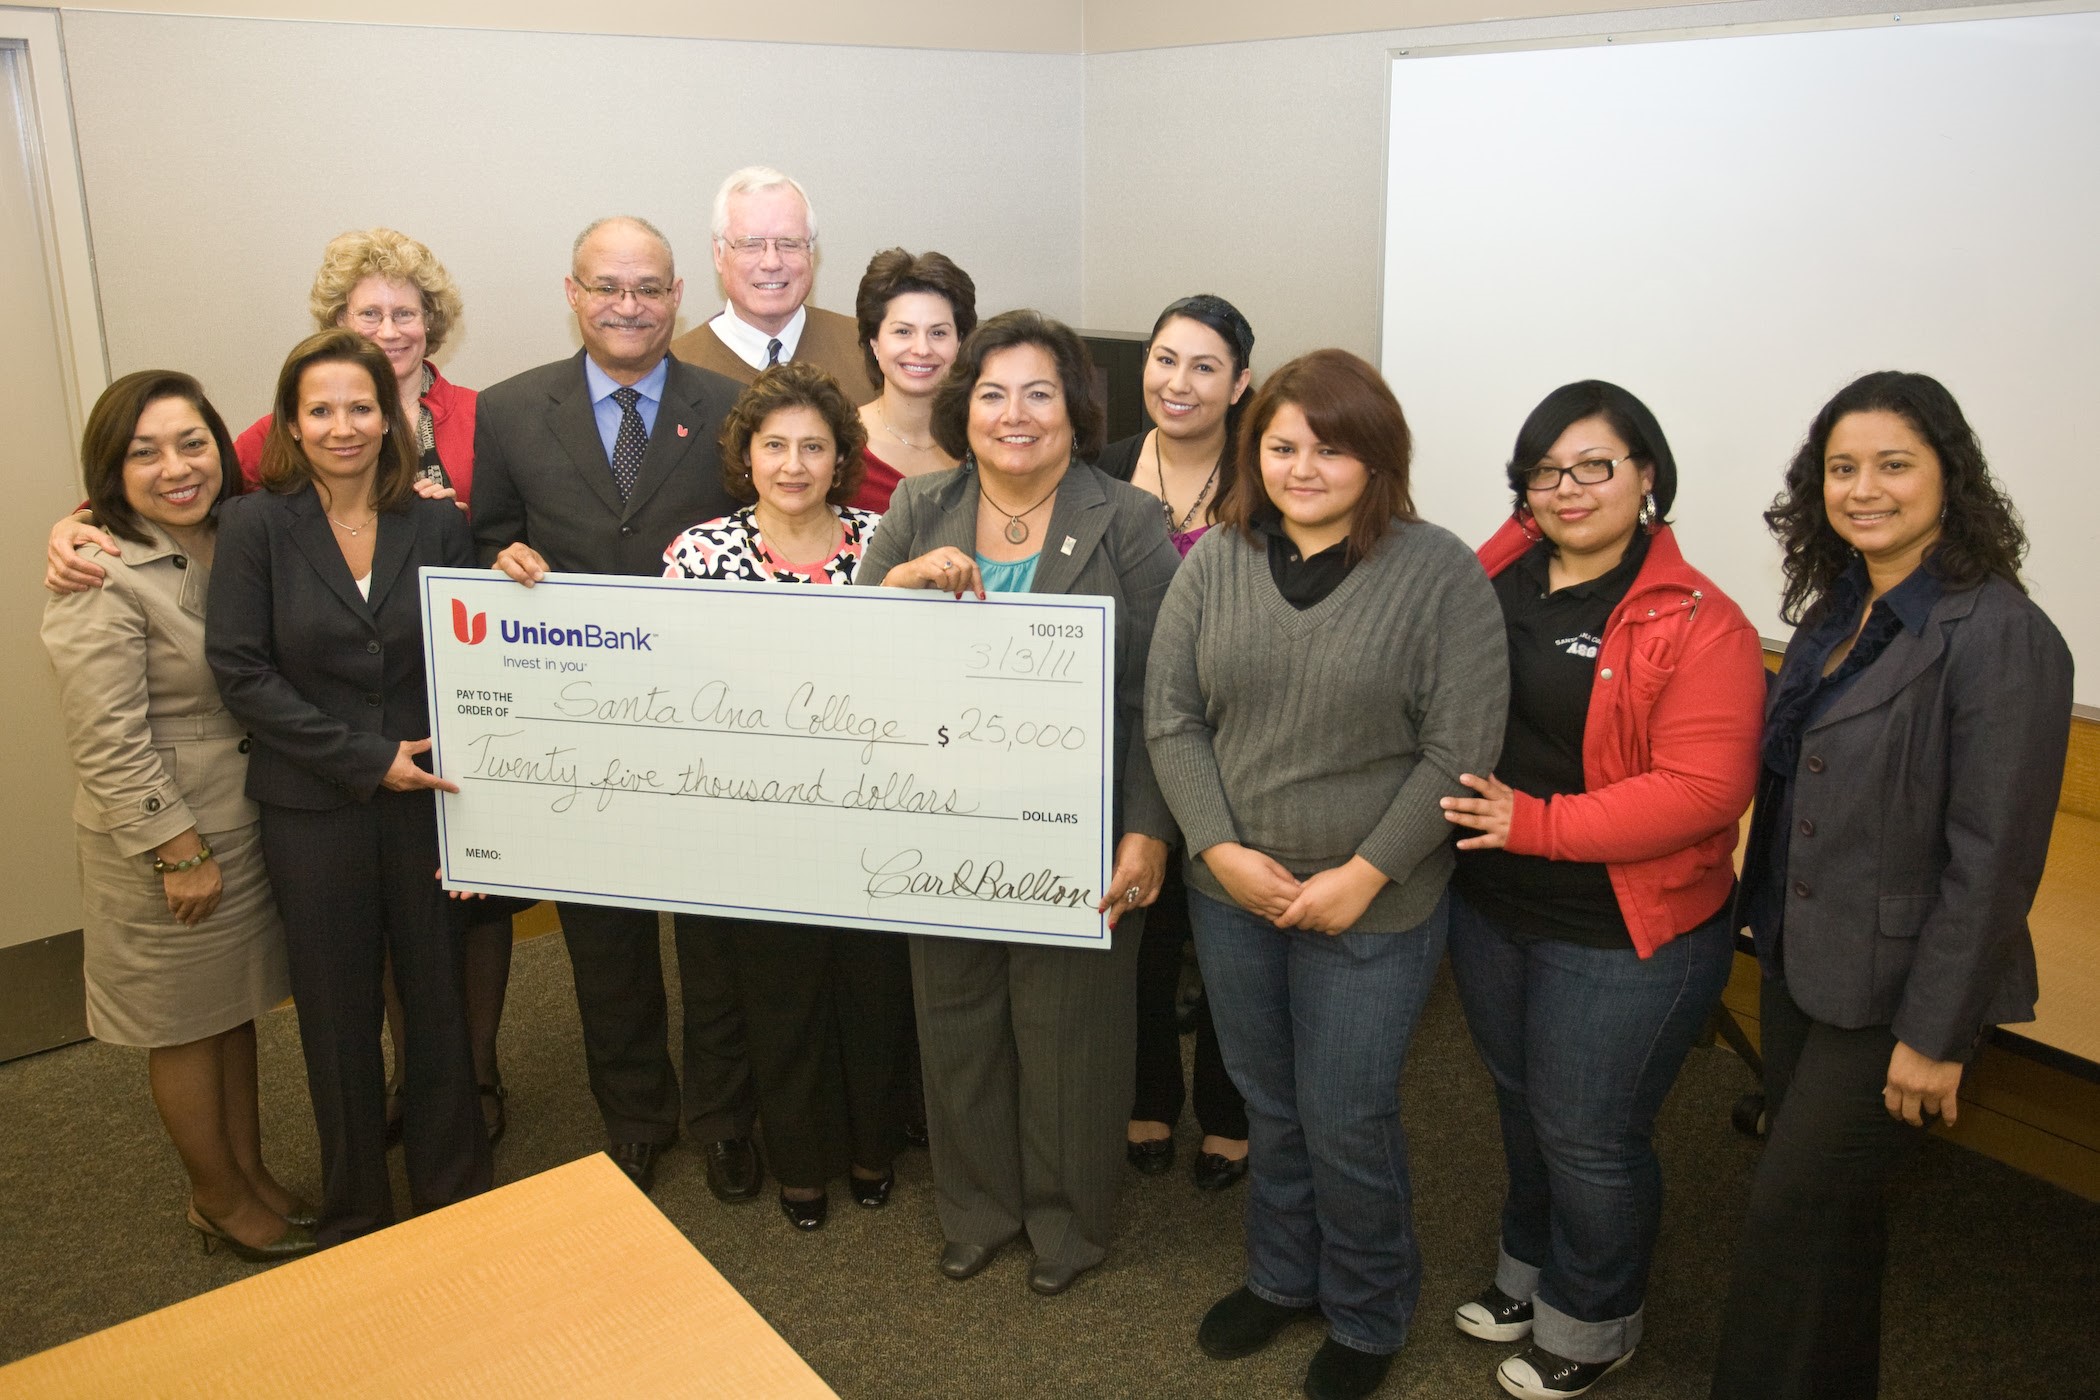 Union Bank Check presentation from 2011